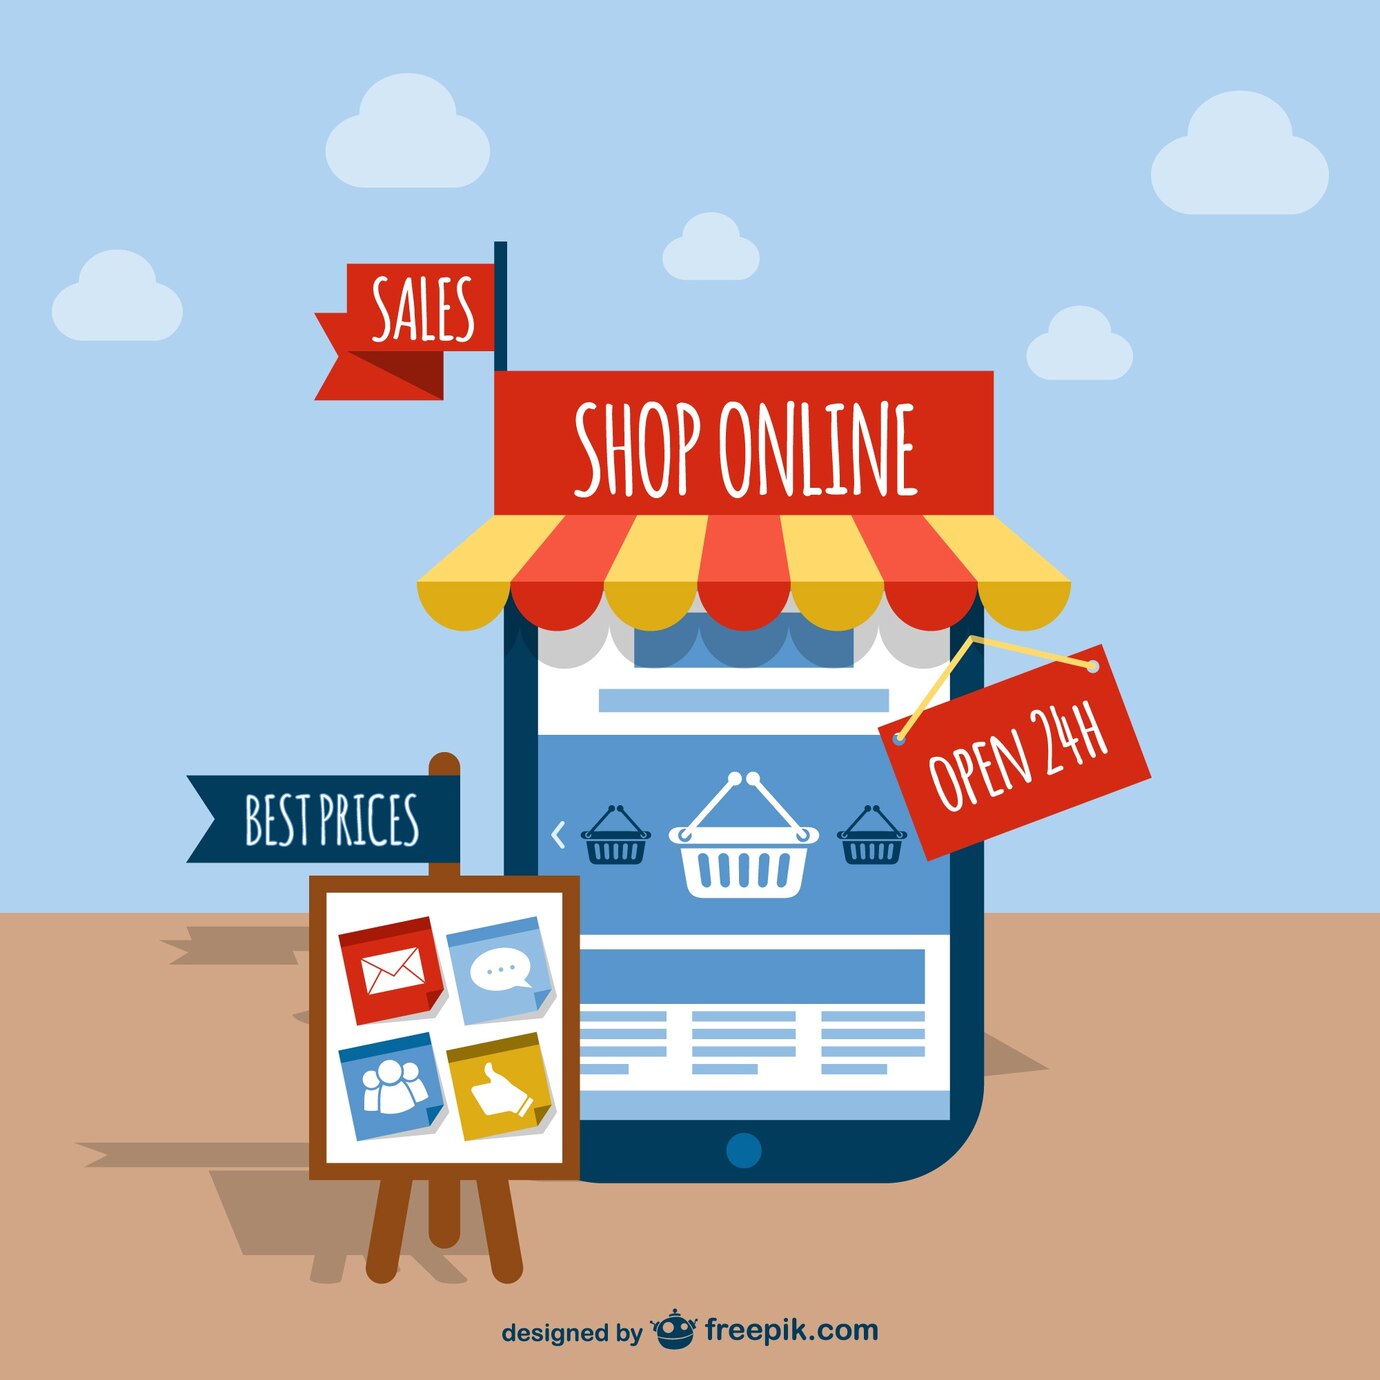 Tips: 5 ways to sell online without a website